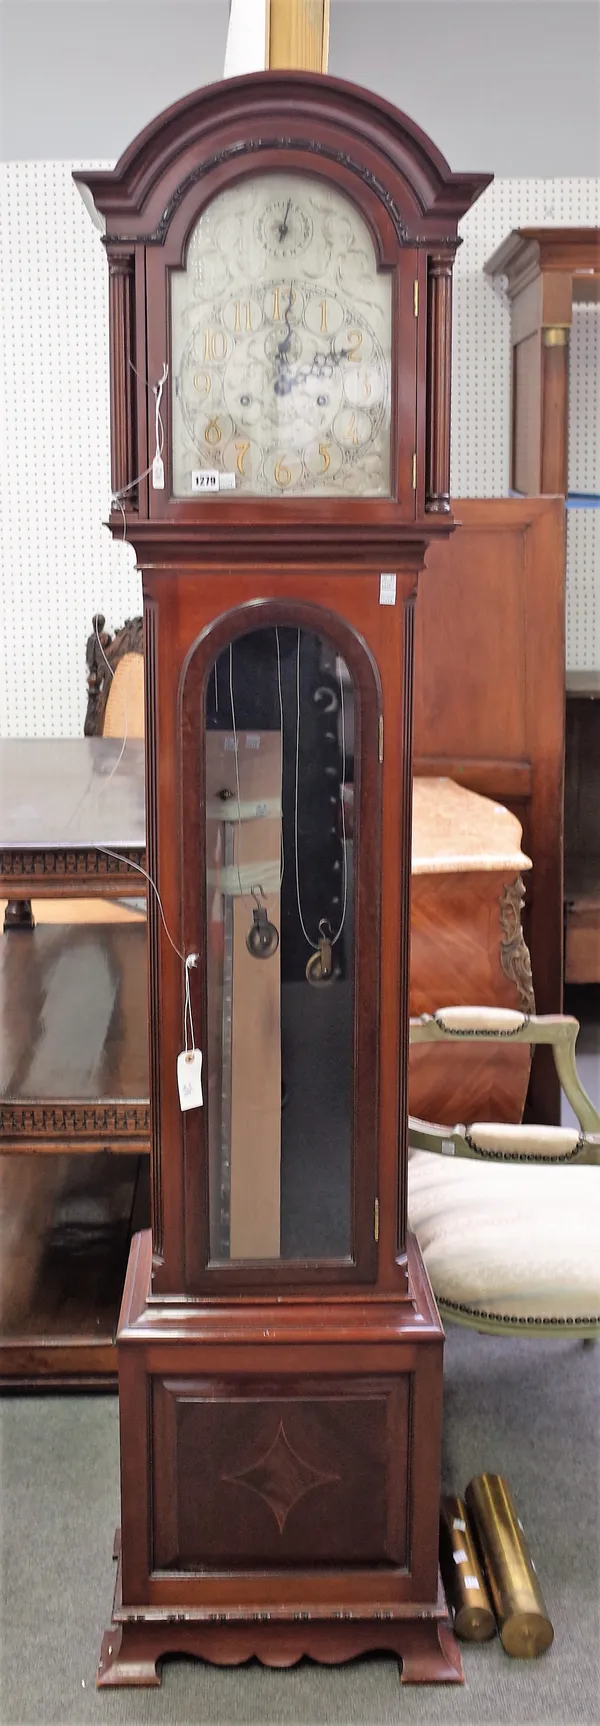 An Edwardian mahogany Westminster/Whittington twin train quarter-chiming longcase clockRetailed by David Wilson, Aberdeen, circa 1910The pediment with